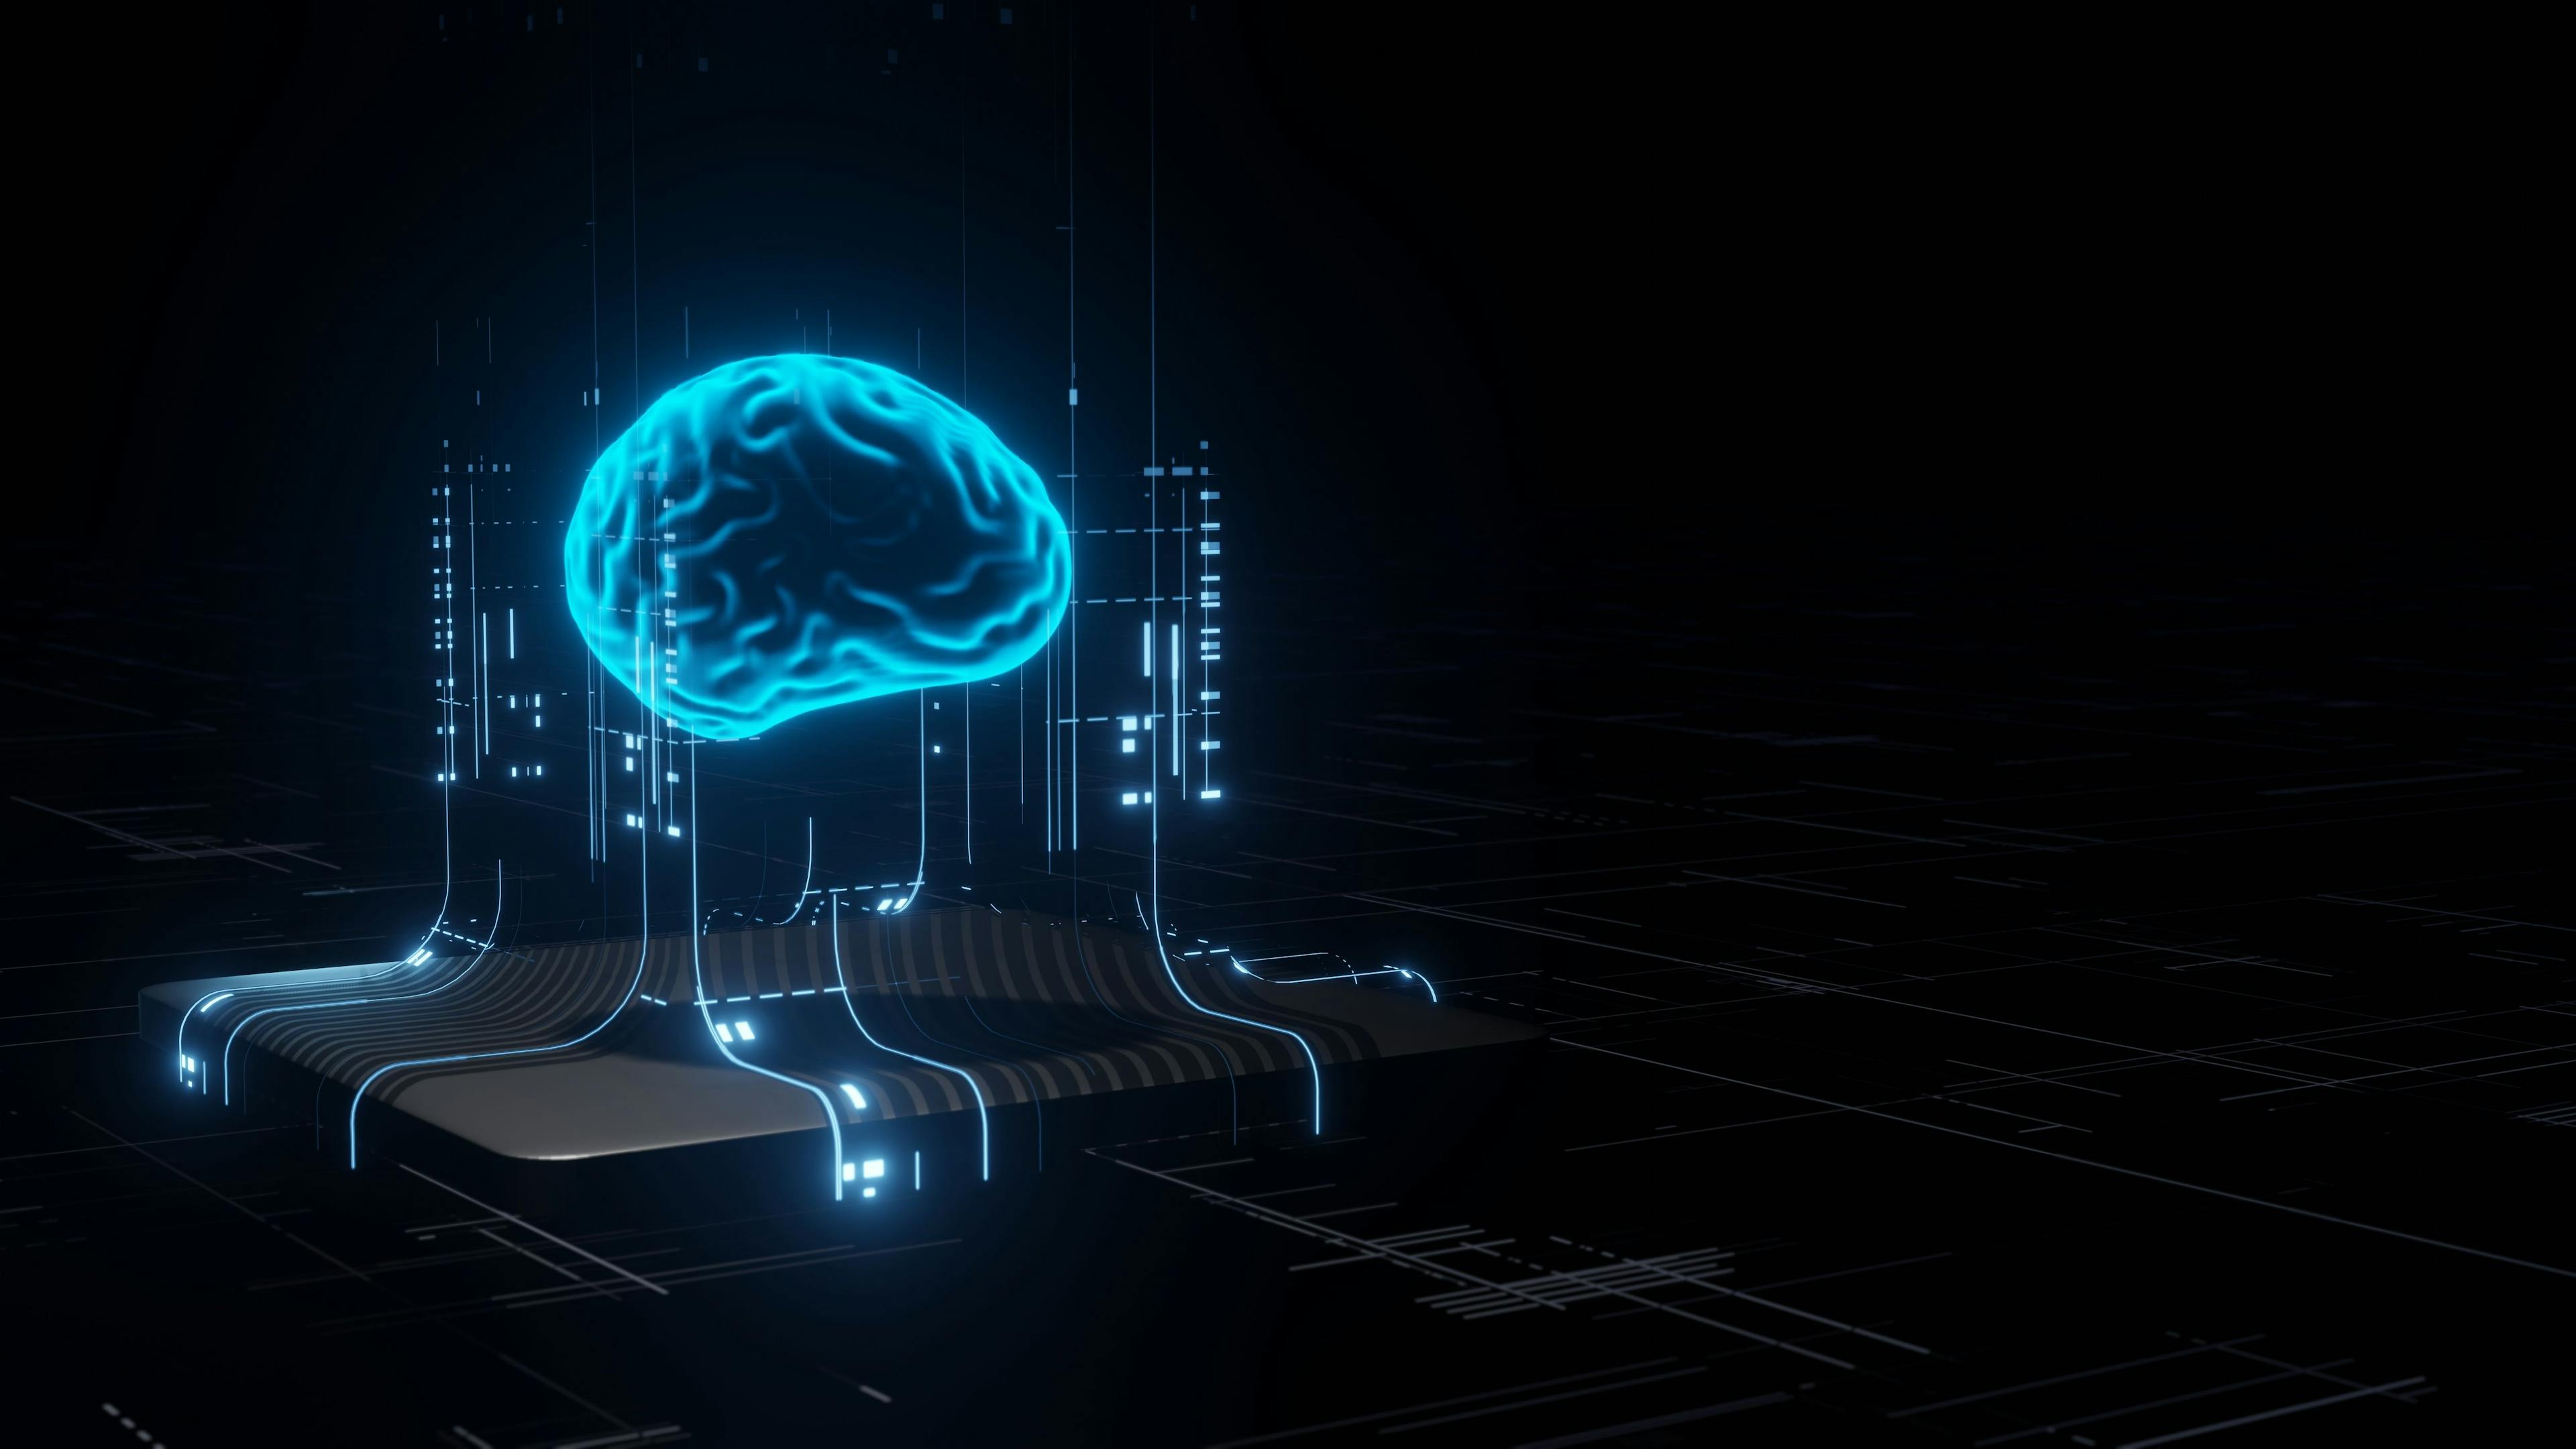 3D Rendering of Artificial Intelligence hardware concept. Glowing blue brain circuit on microchip on computer motherboard. For big data processing, ai trading, machine learning, technology background | Image Credit: © knssr - stock.adobe.com 